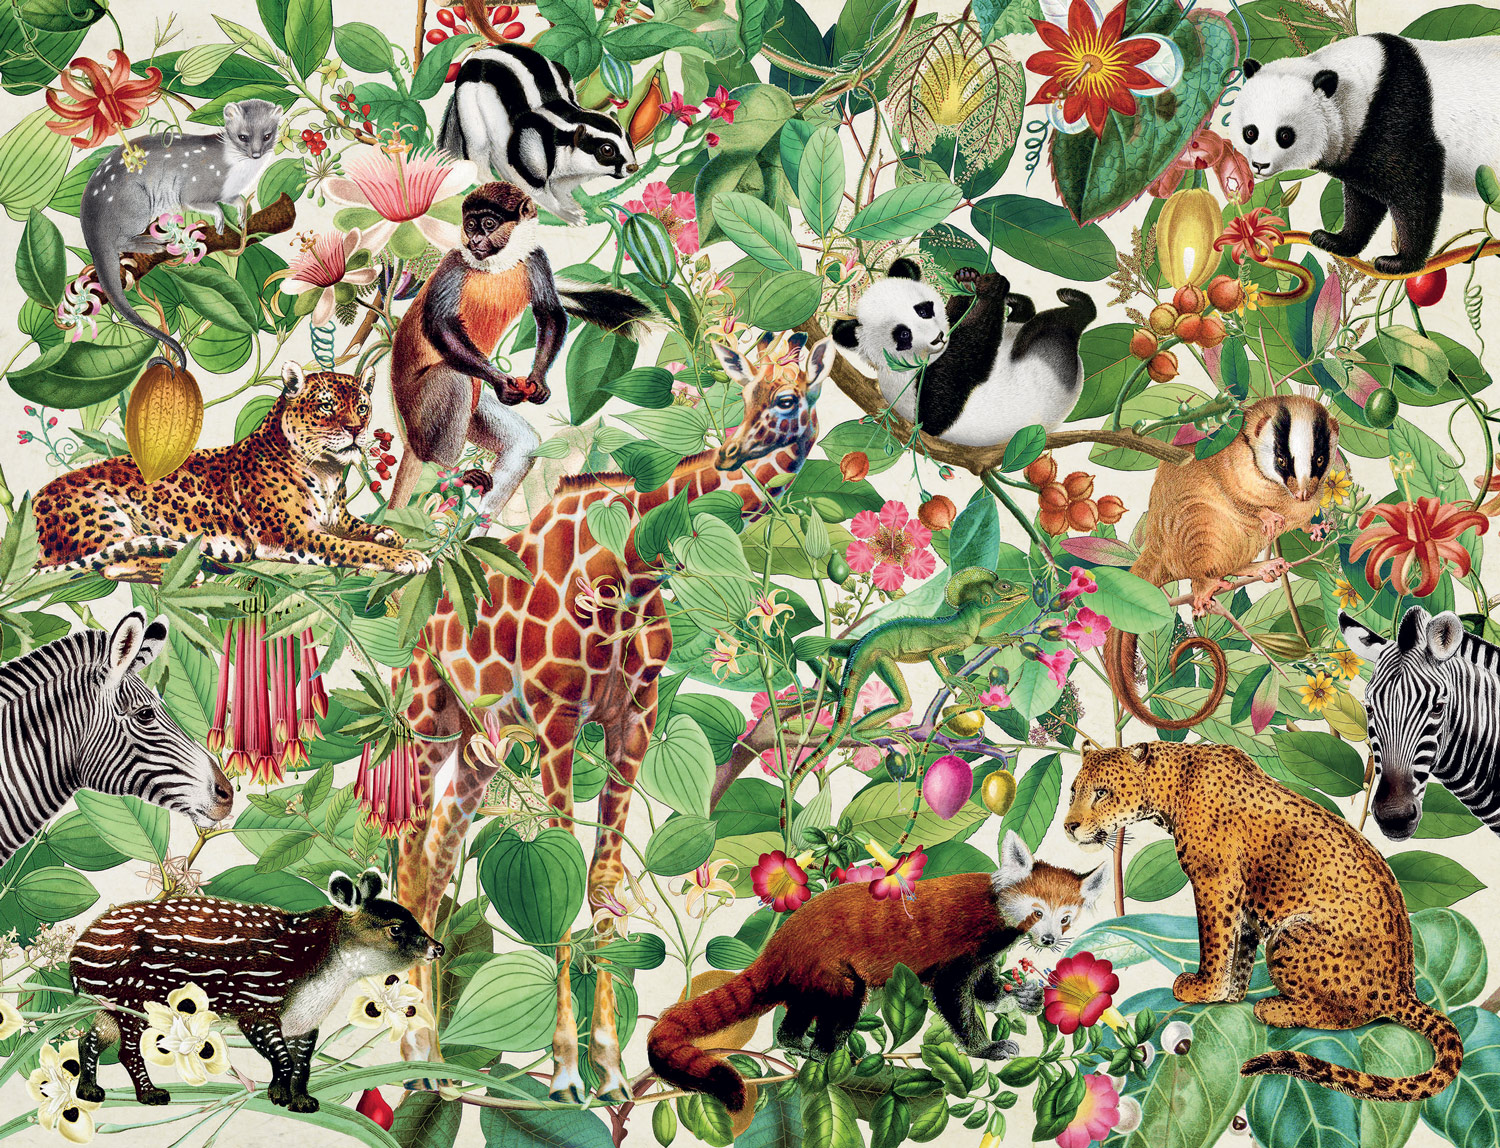 Fantastic Forest Forest Jigsaw Puzzle By Clementoni